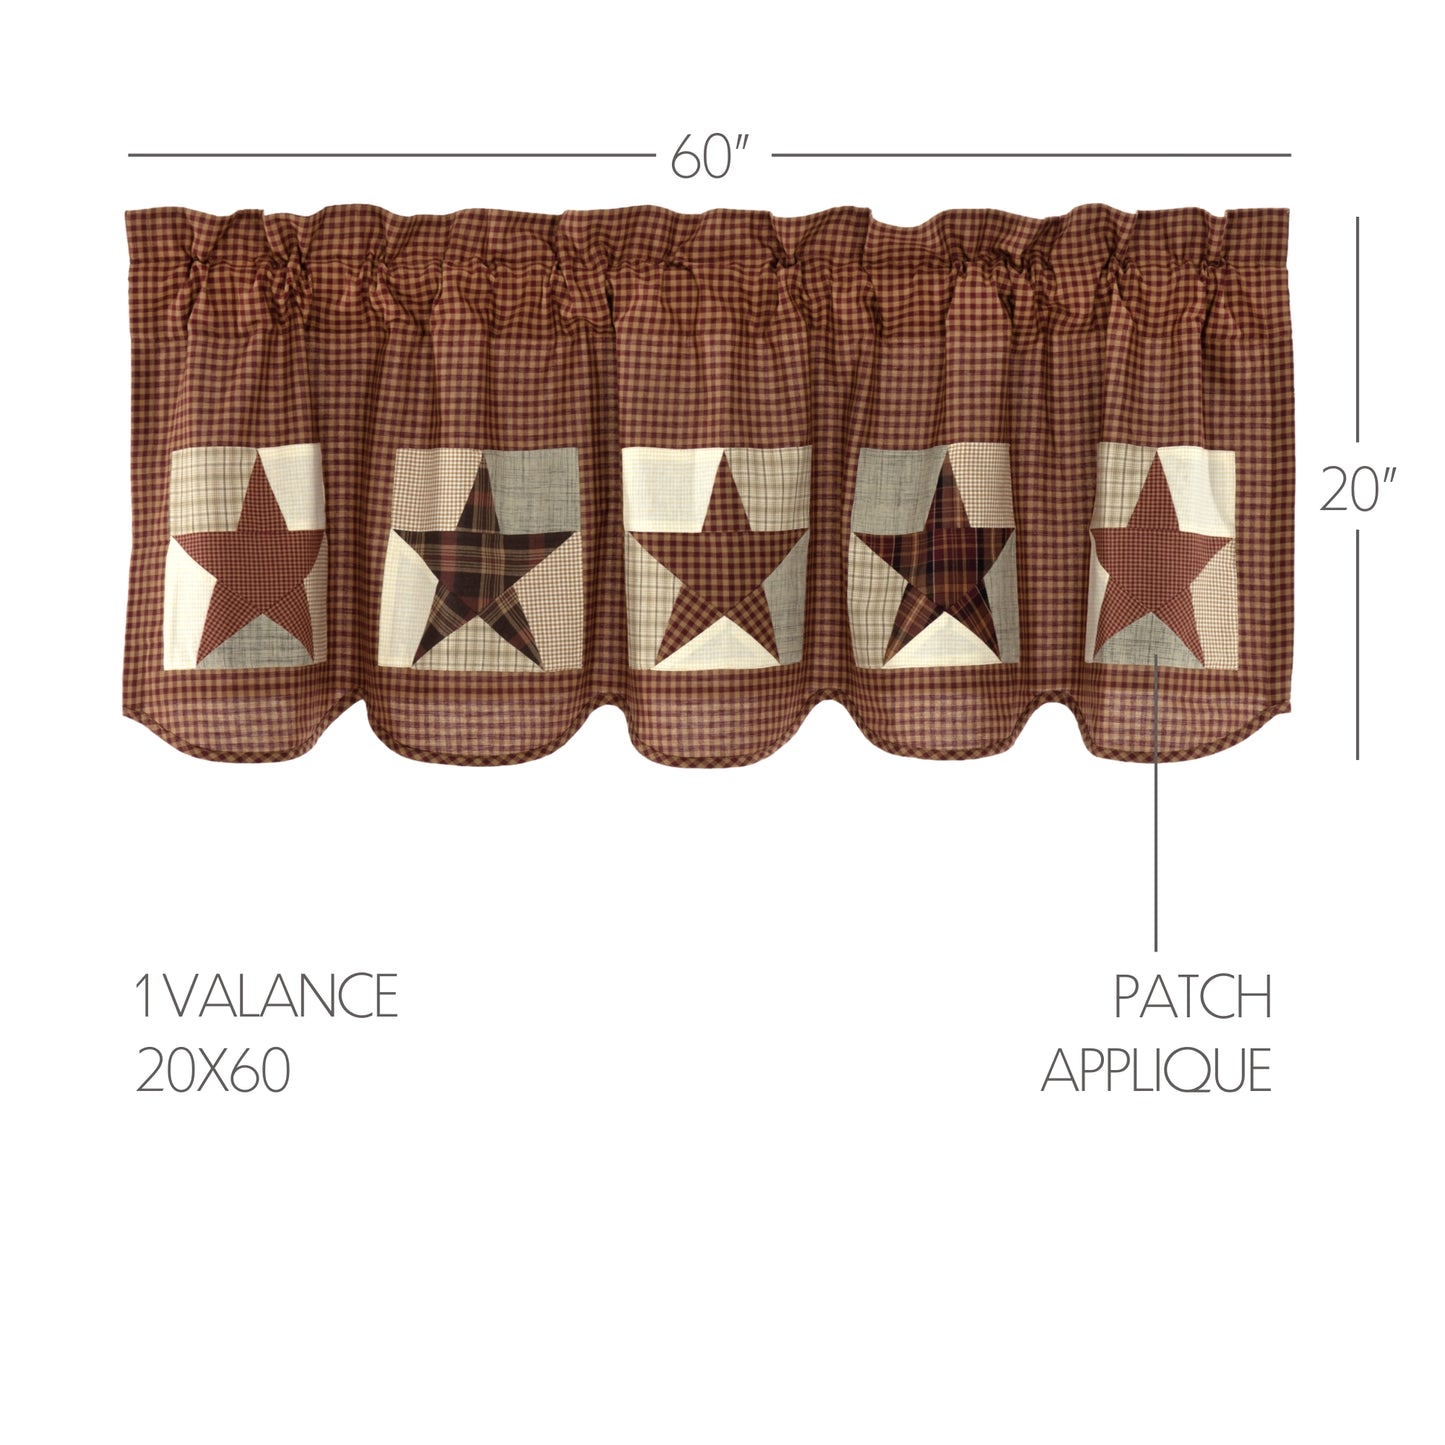 50806-Abilene-Patch-Block-and-Star-Valance-20x60-image-1